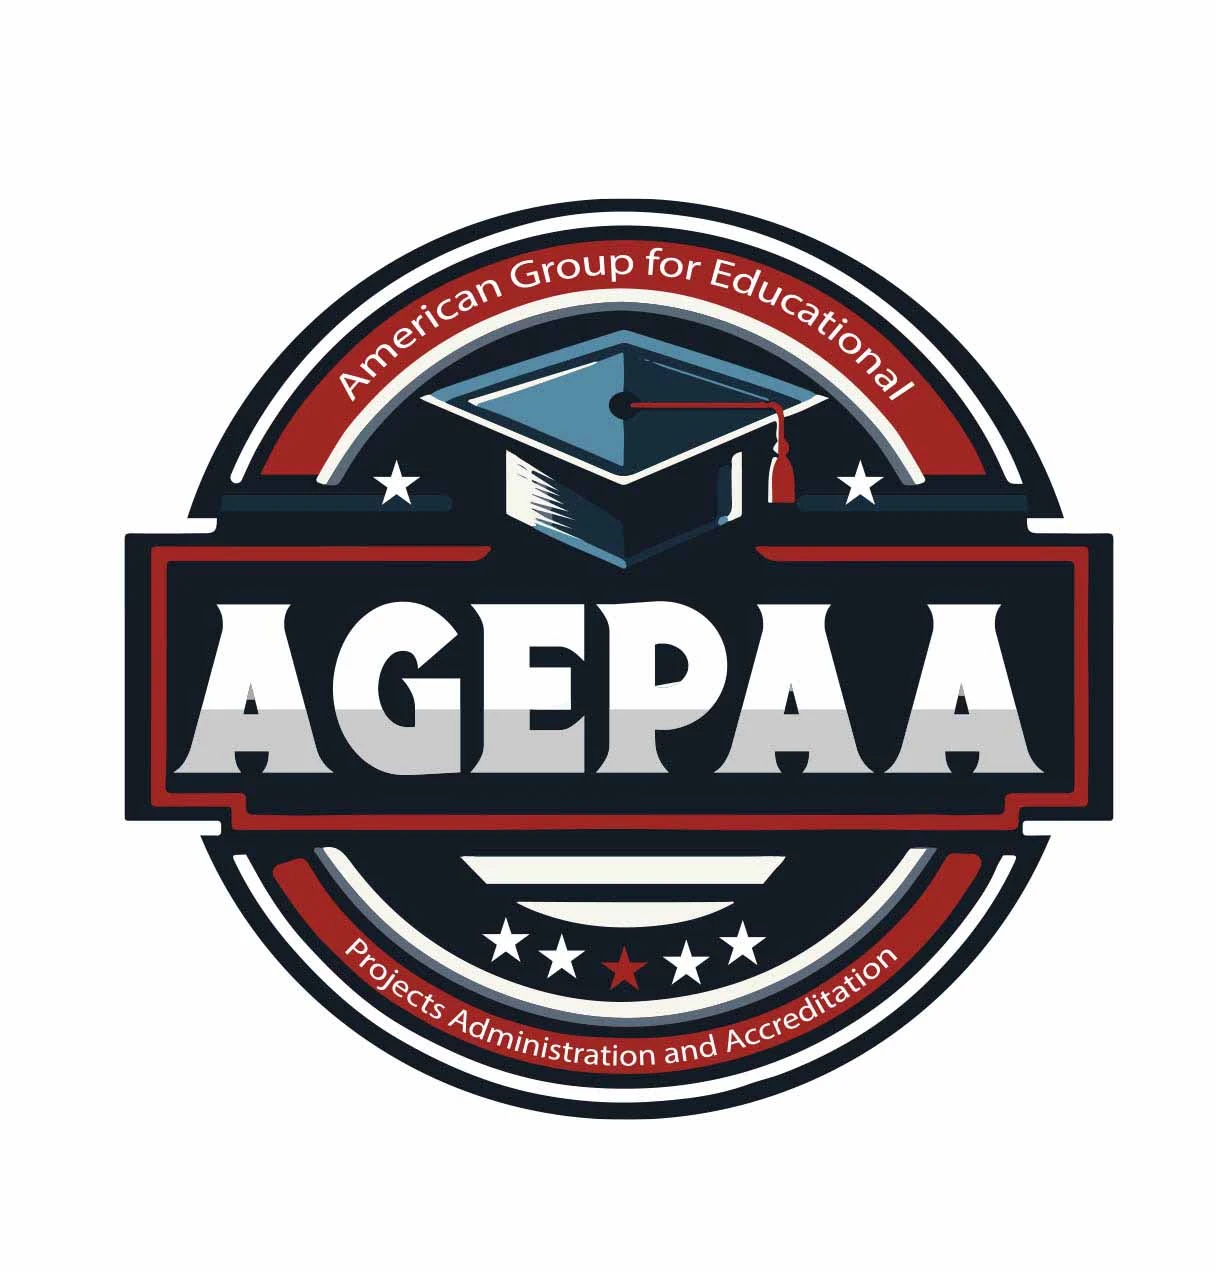 AGEPAA - American Group for Educational Projects Administration and Accreditation